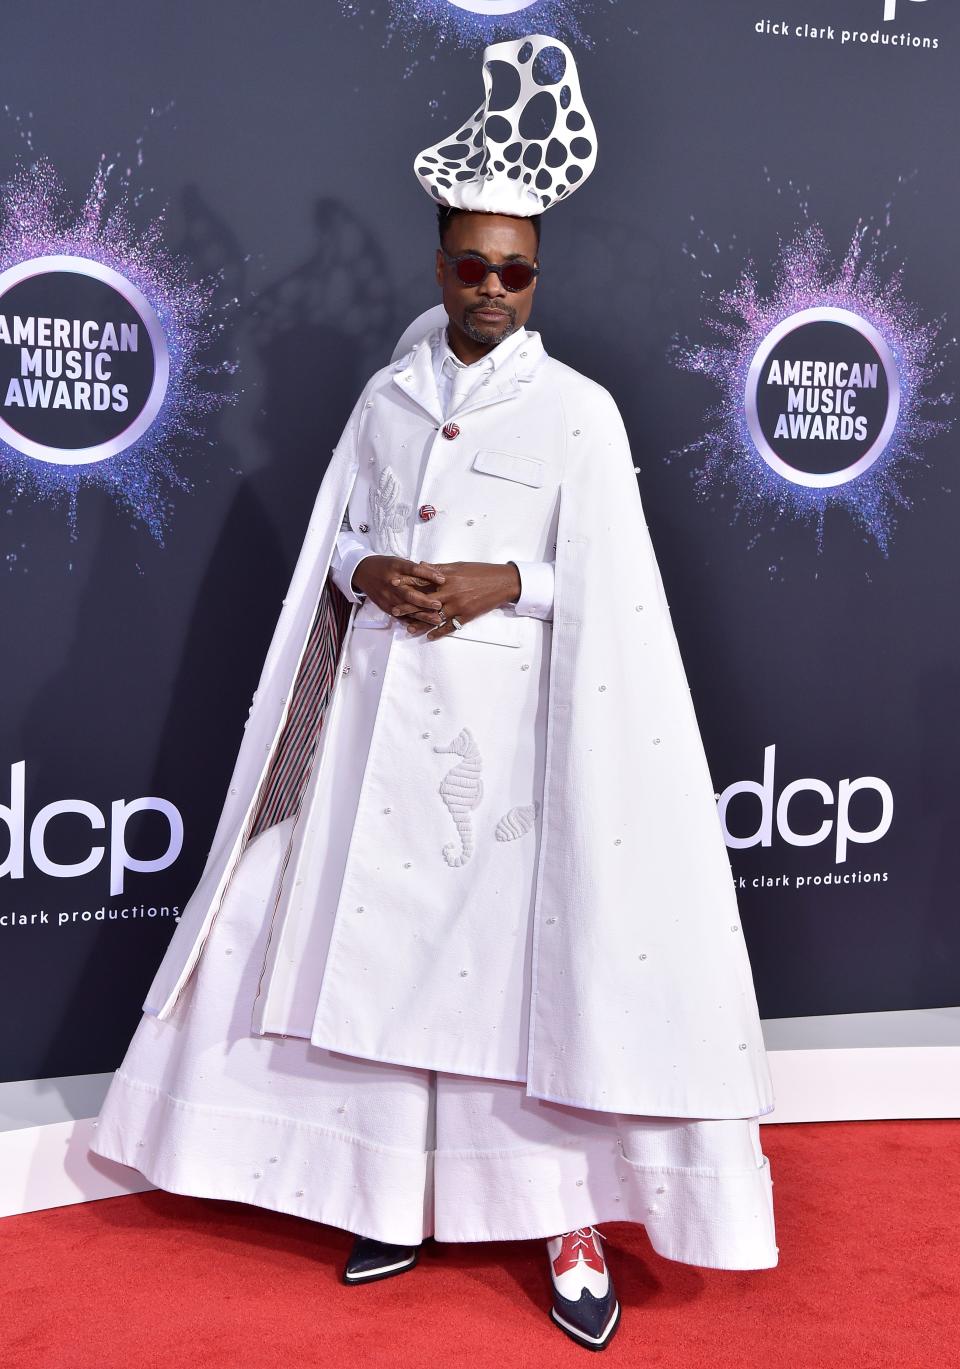 Billy Porter at the 2019 American Music Awards in white gown and abstract headpiece